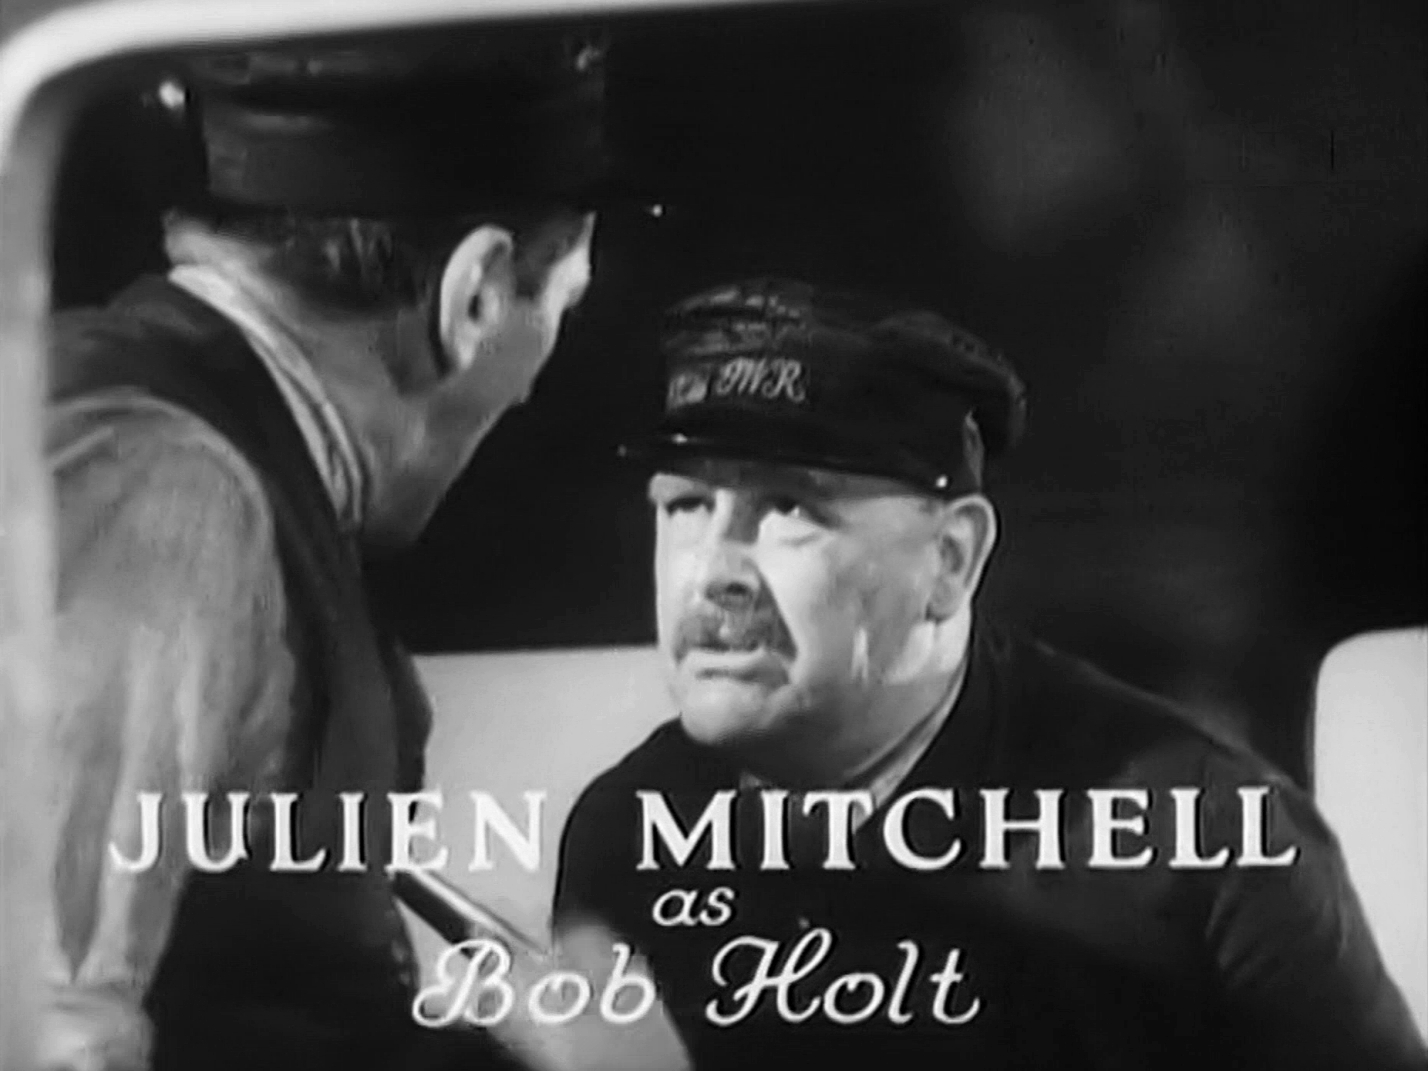 Main title from The Last Journey (1935) (6). Julien Mitchell as Bob Holt